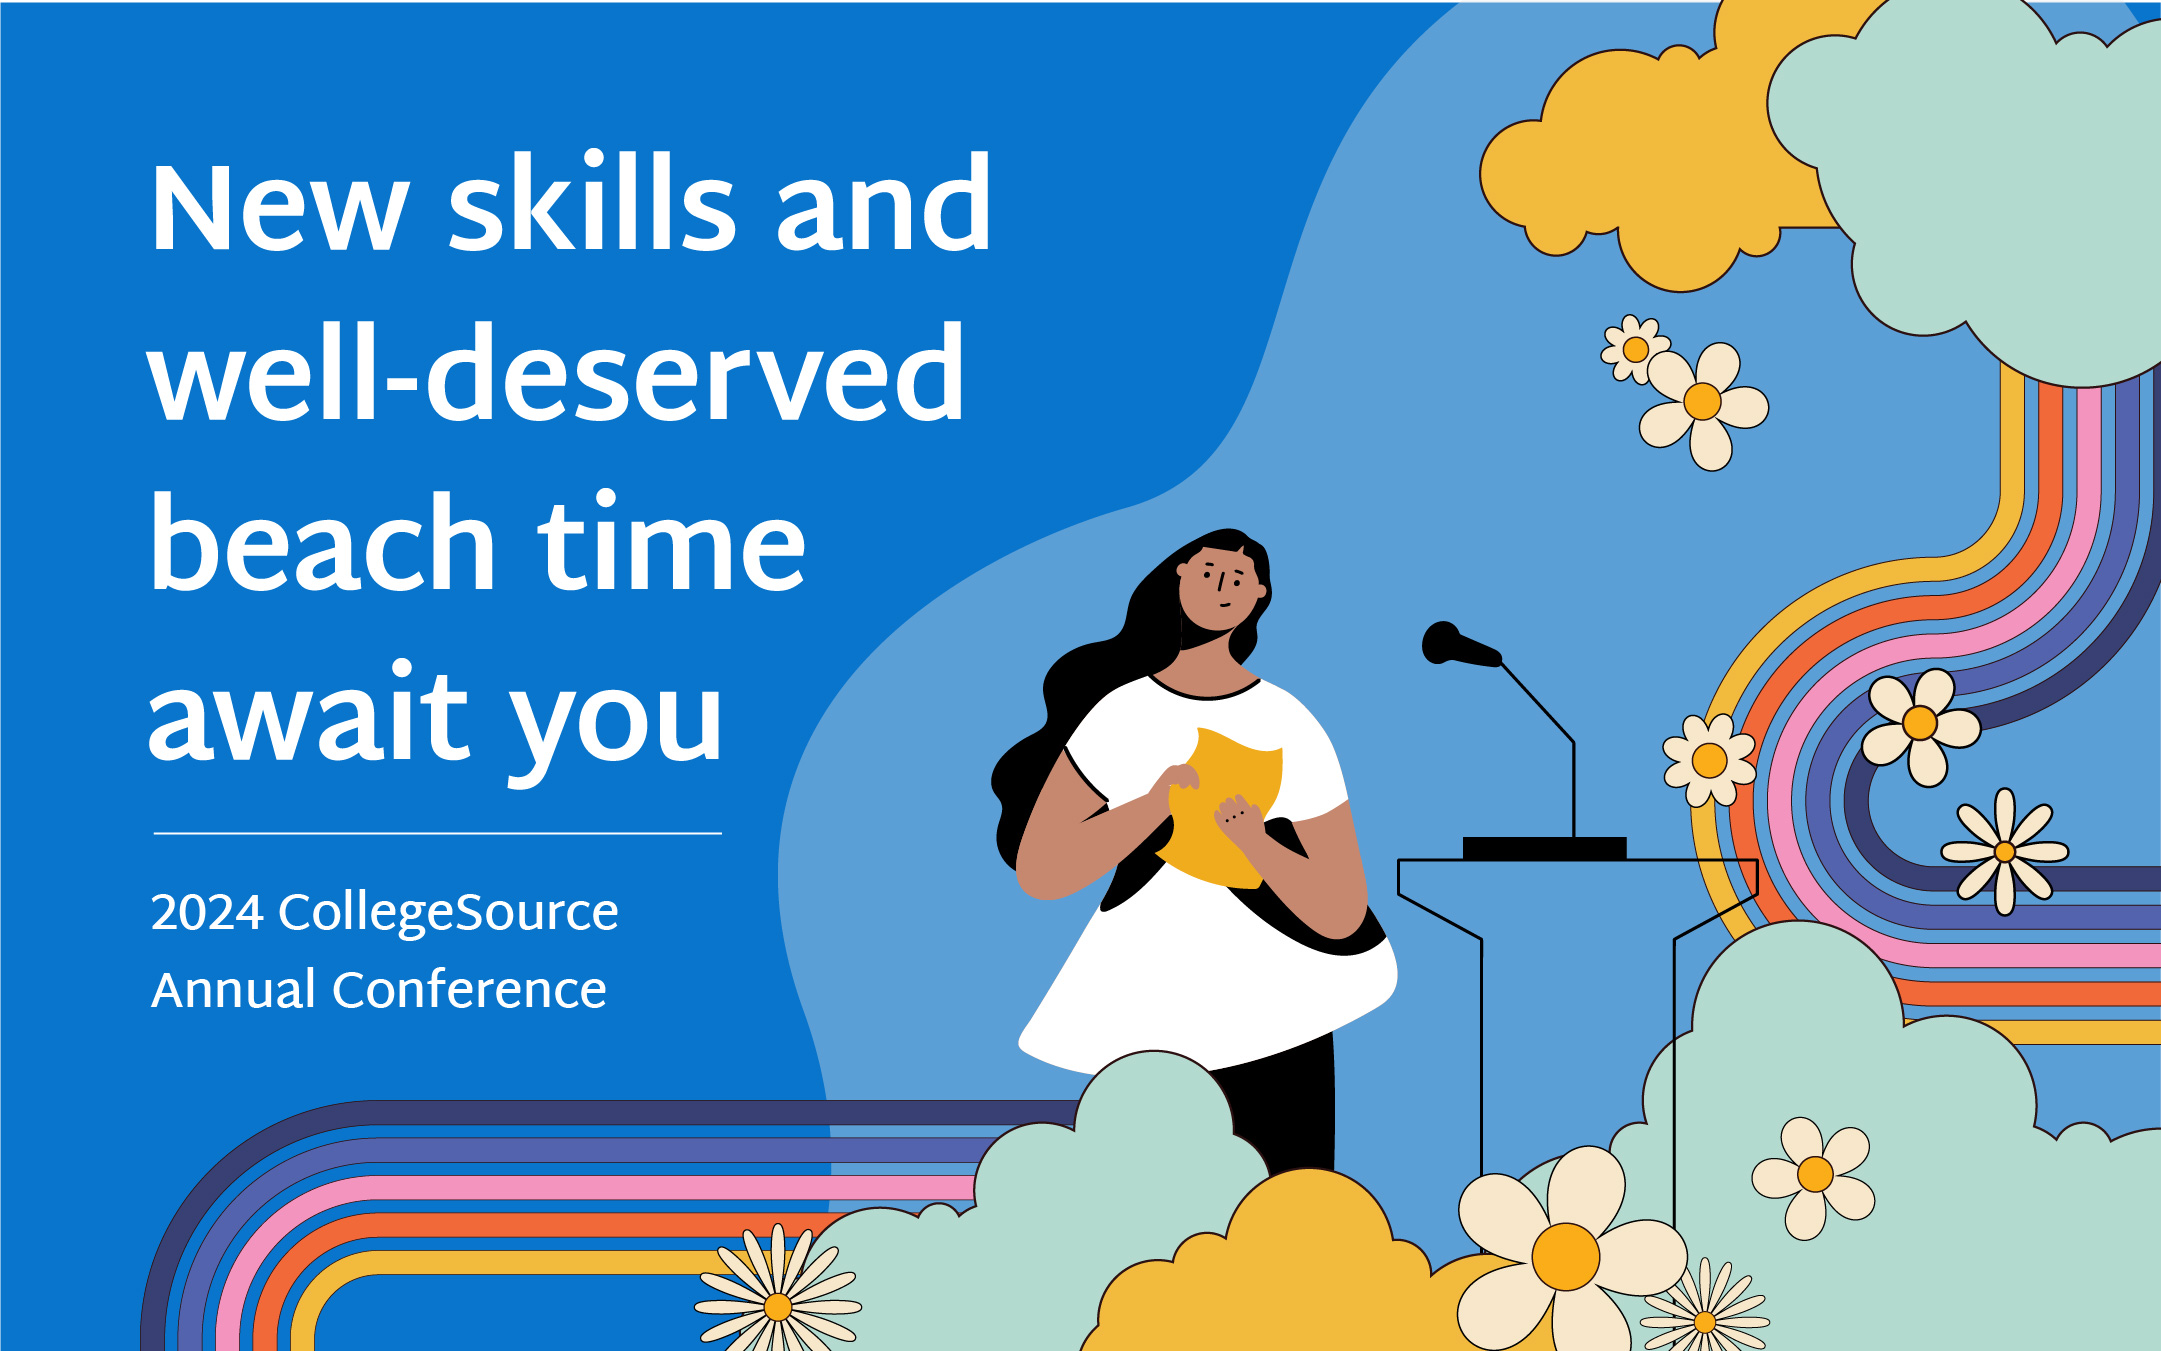 new-skills-2024-collegesource-conference